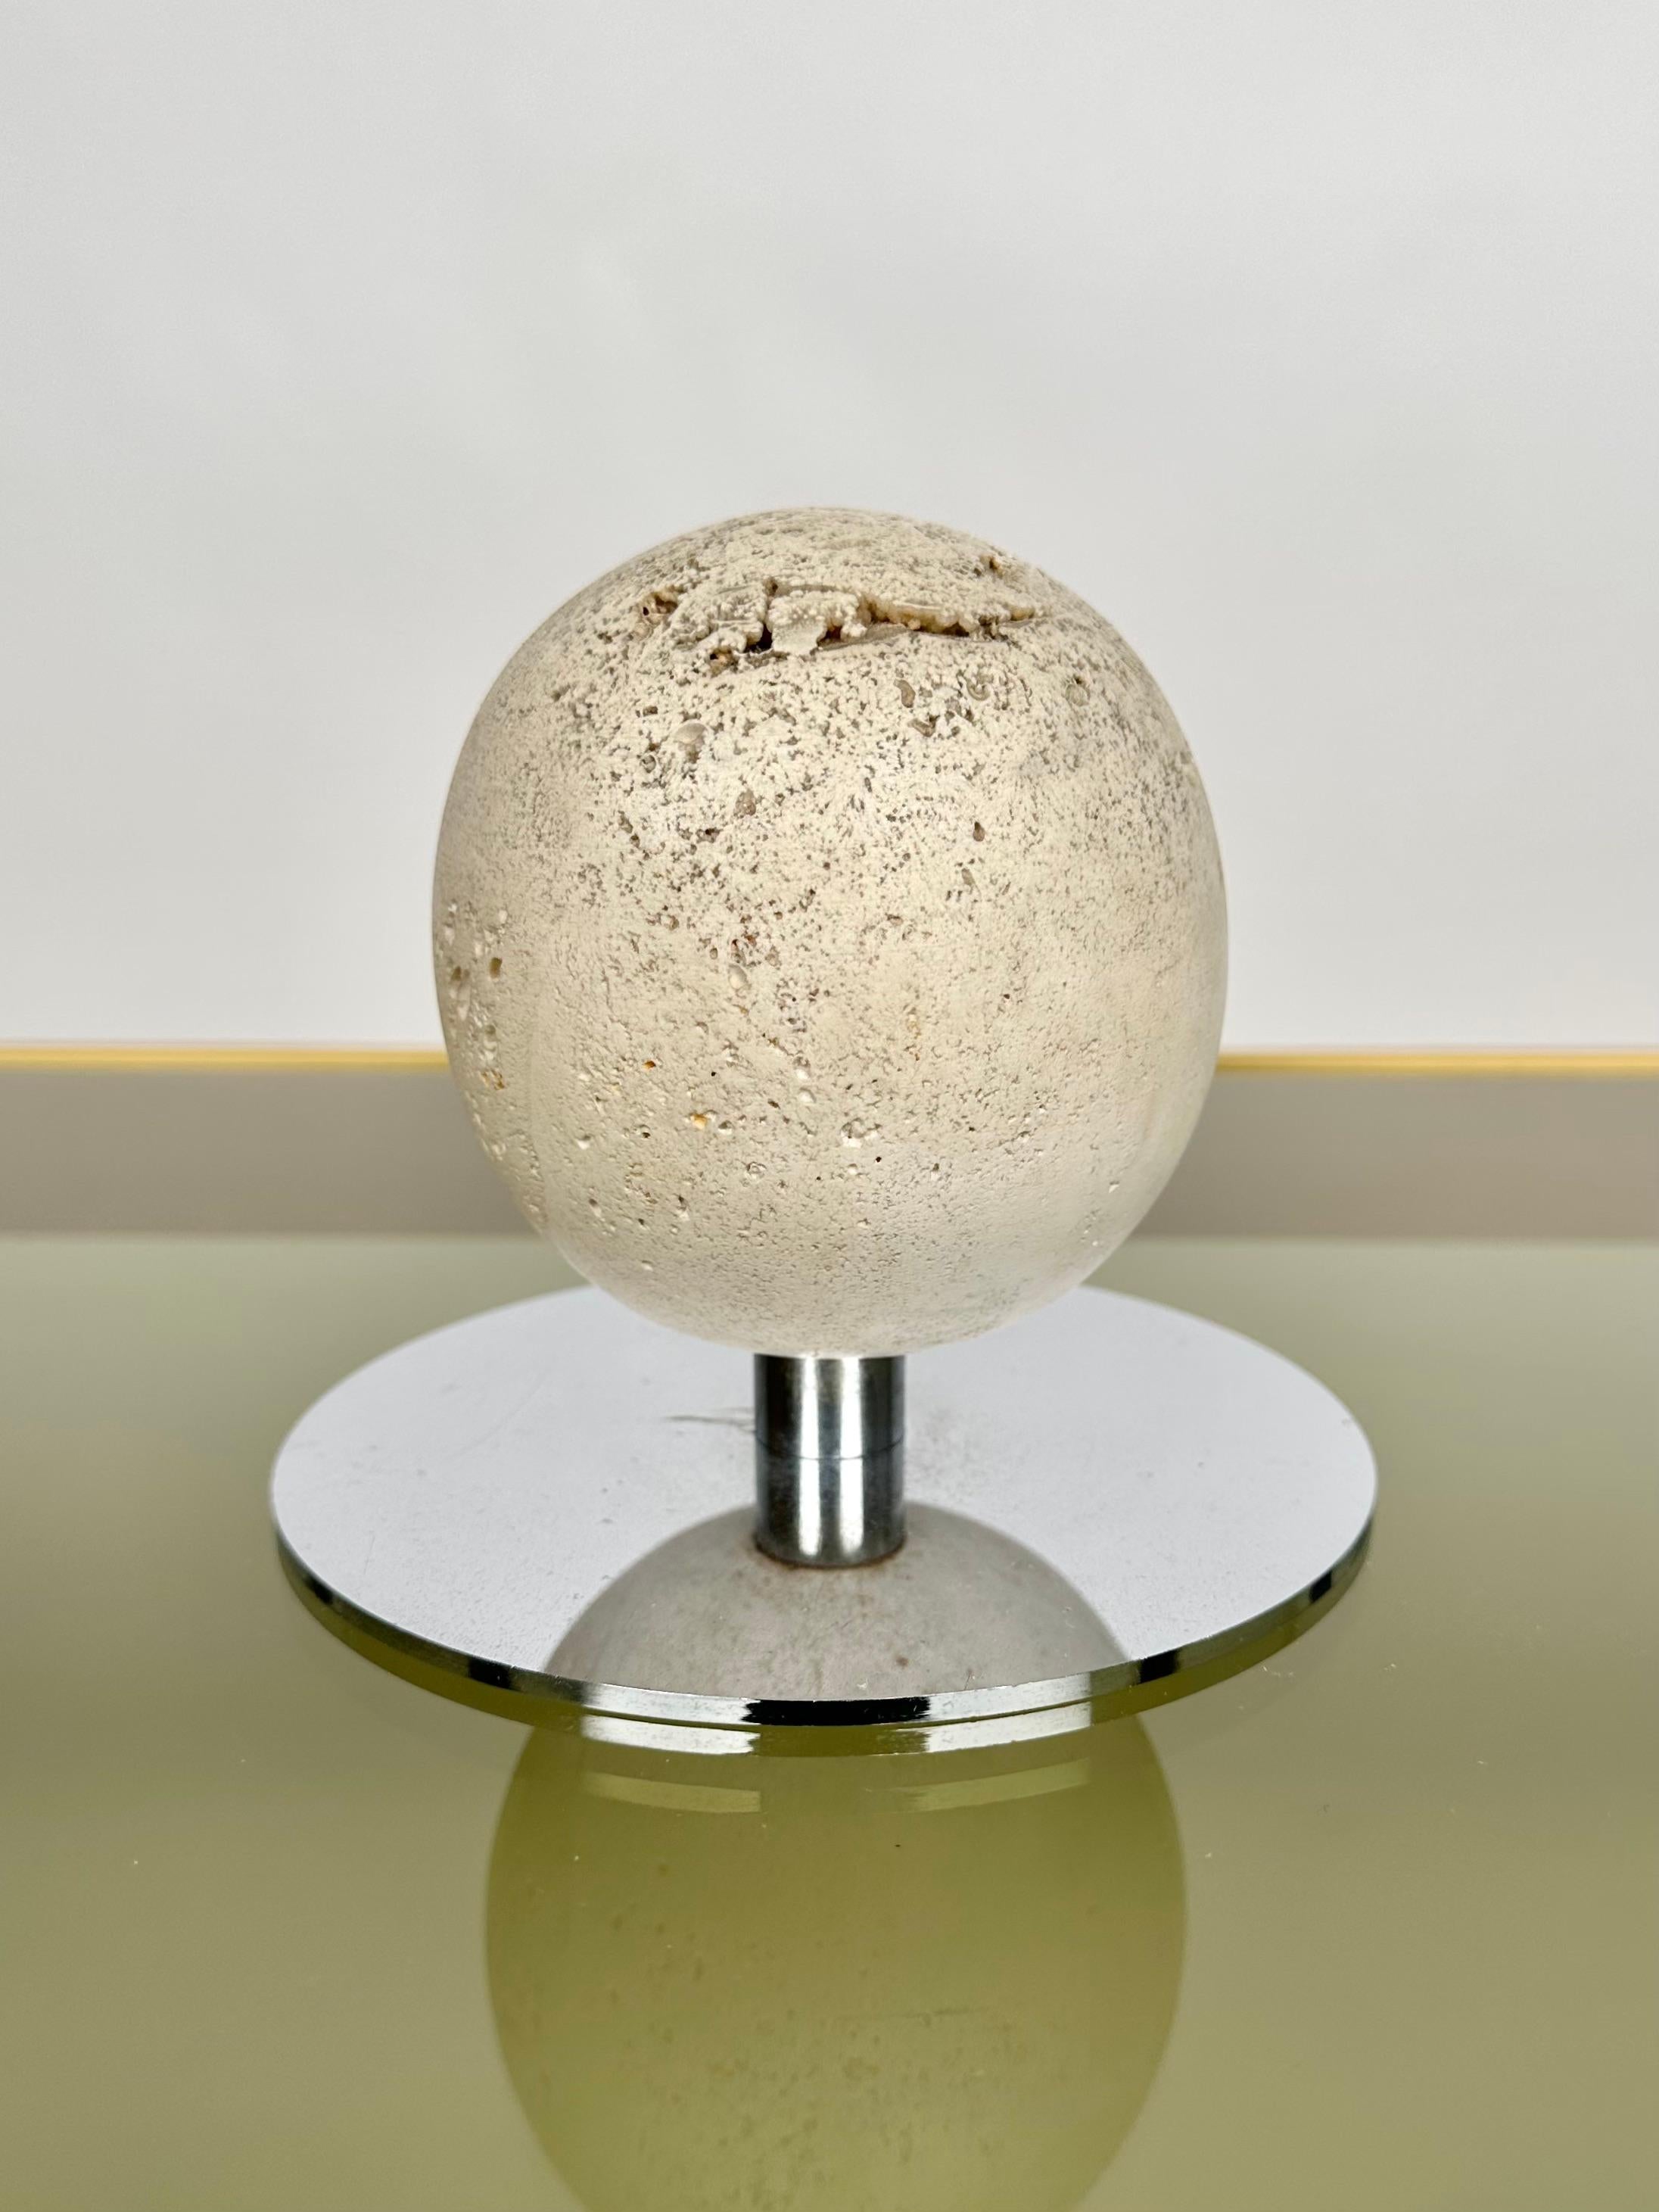 Metal Mid-Century Ball Sculpture Paperweight in Steel and Travertine, Italy, 1970s For Sale